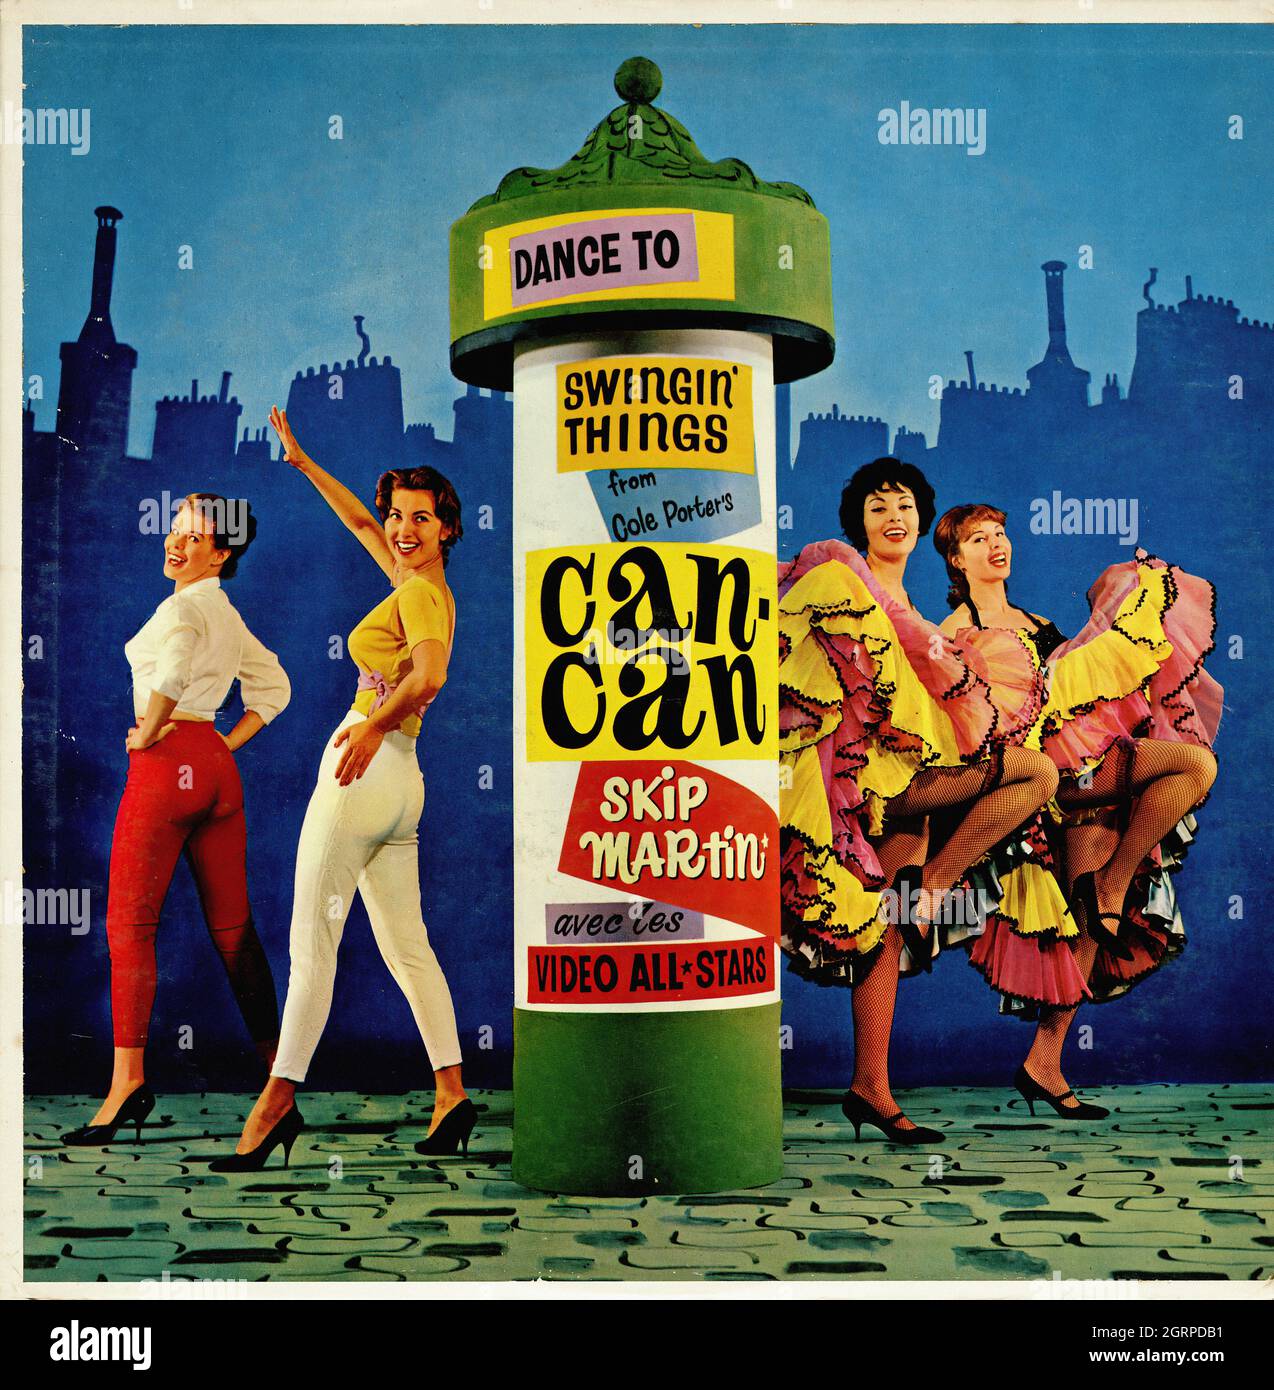 Dance To Swingin' Things From Cole Porter's Can-Can -  Vintage Soundtrack Vinyl Album Stock Photo